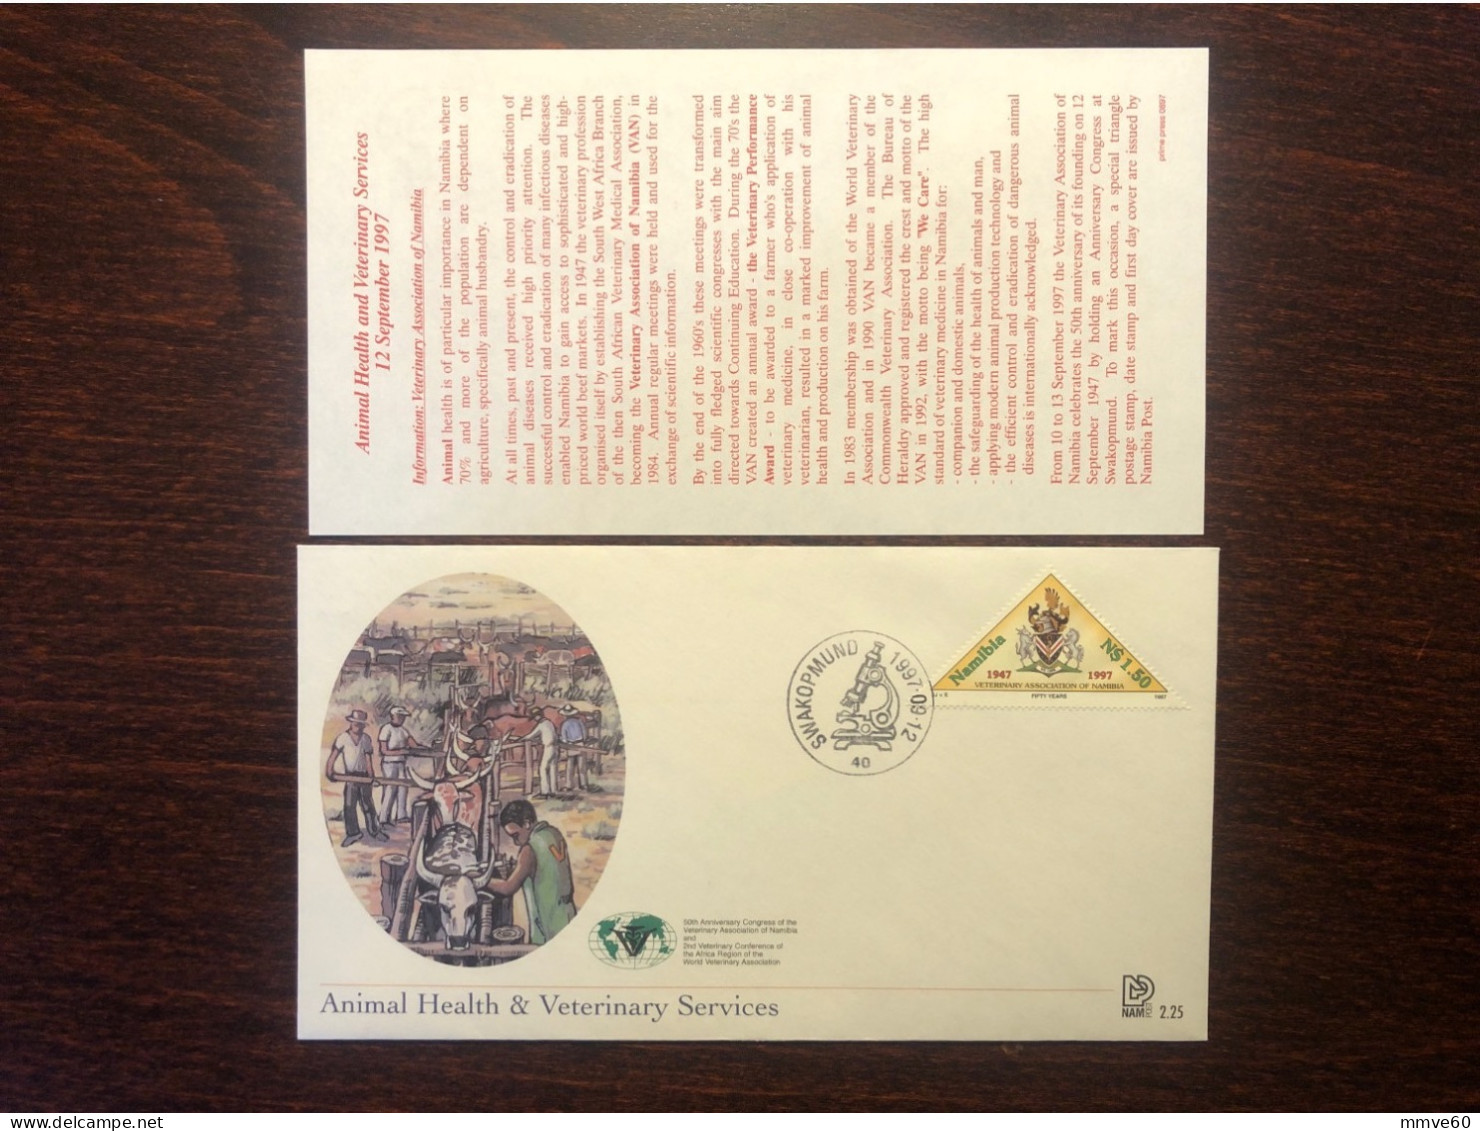 NAMIBIA FDC COVER 1997 YEAR VETERINARY HEALTH MEDICINE STAMPS - Namibie (1990- ...)